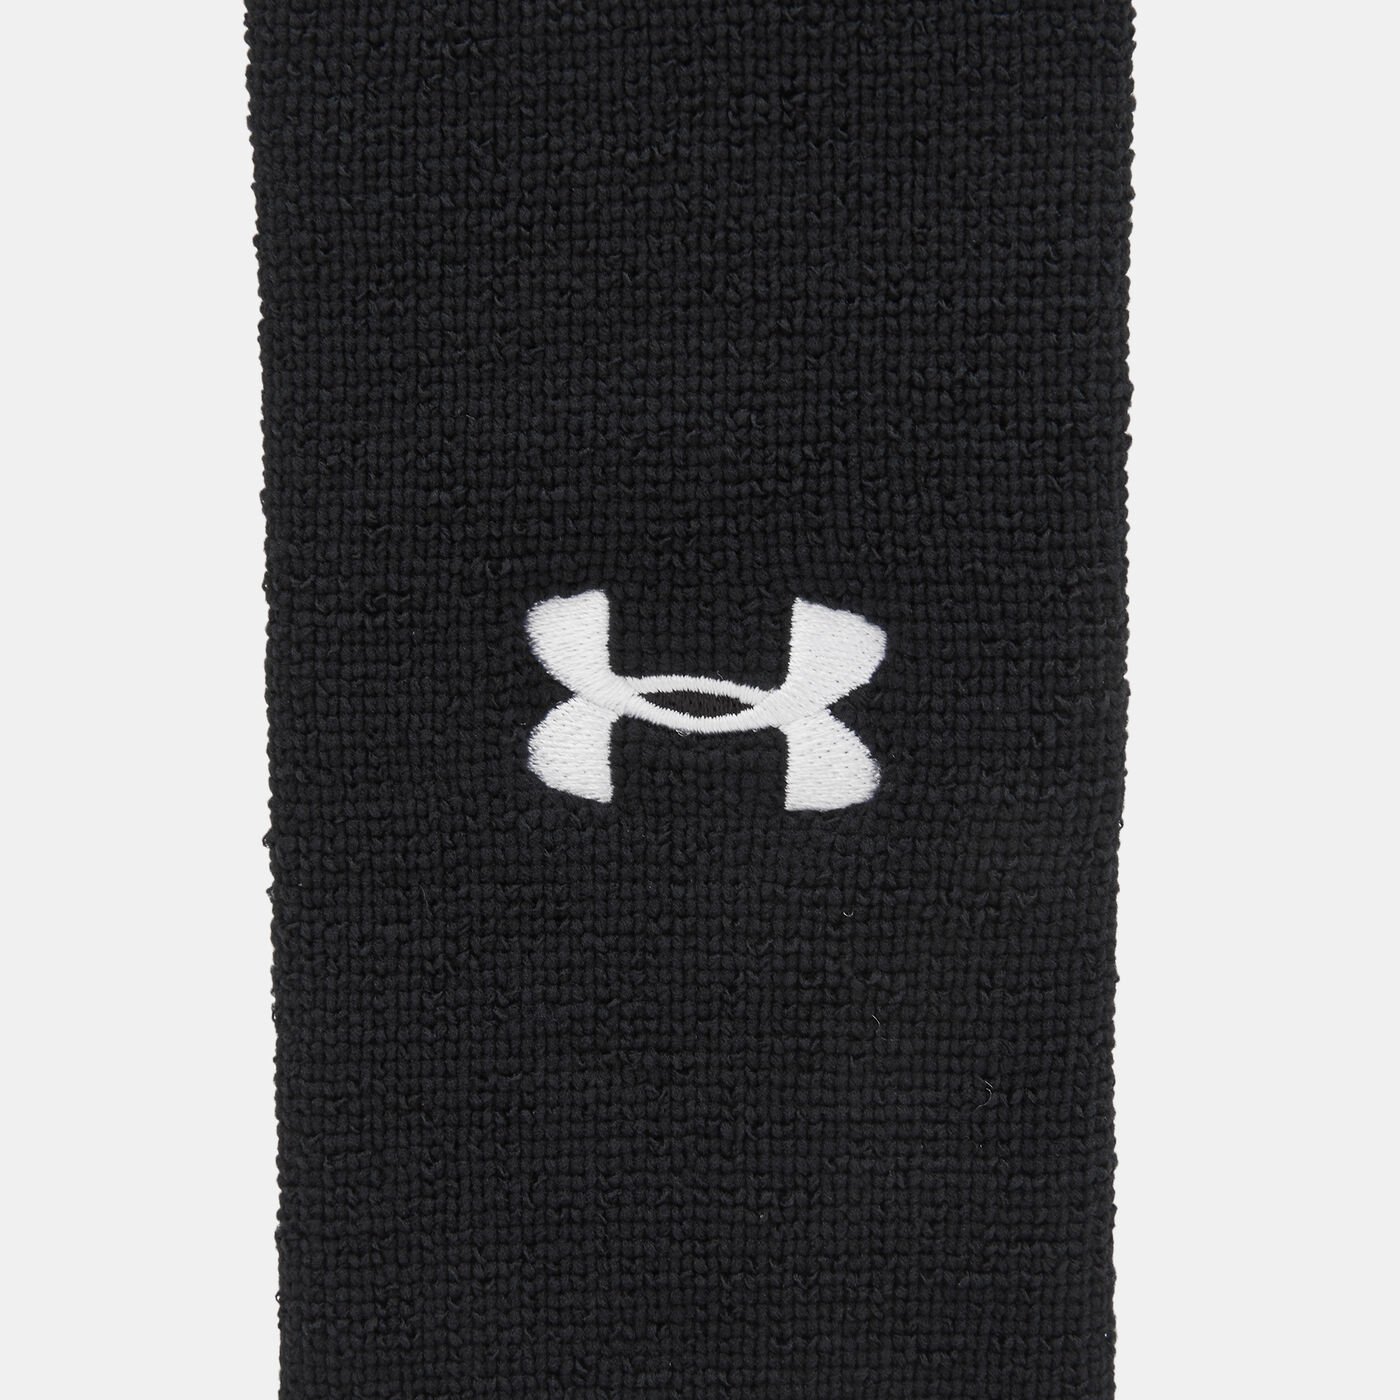 6in Performance Wristband